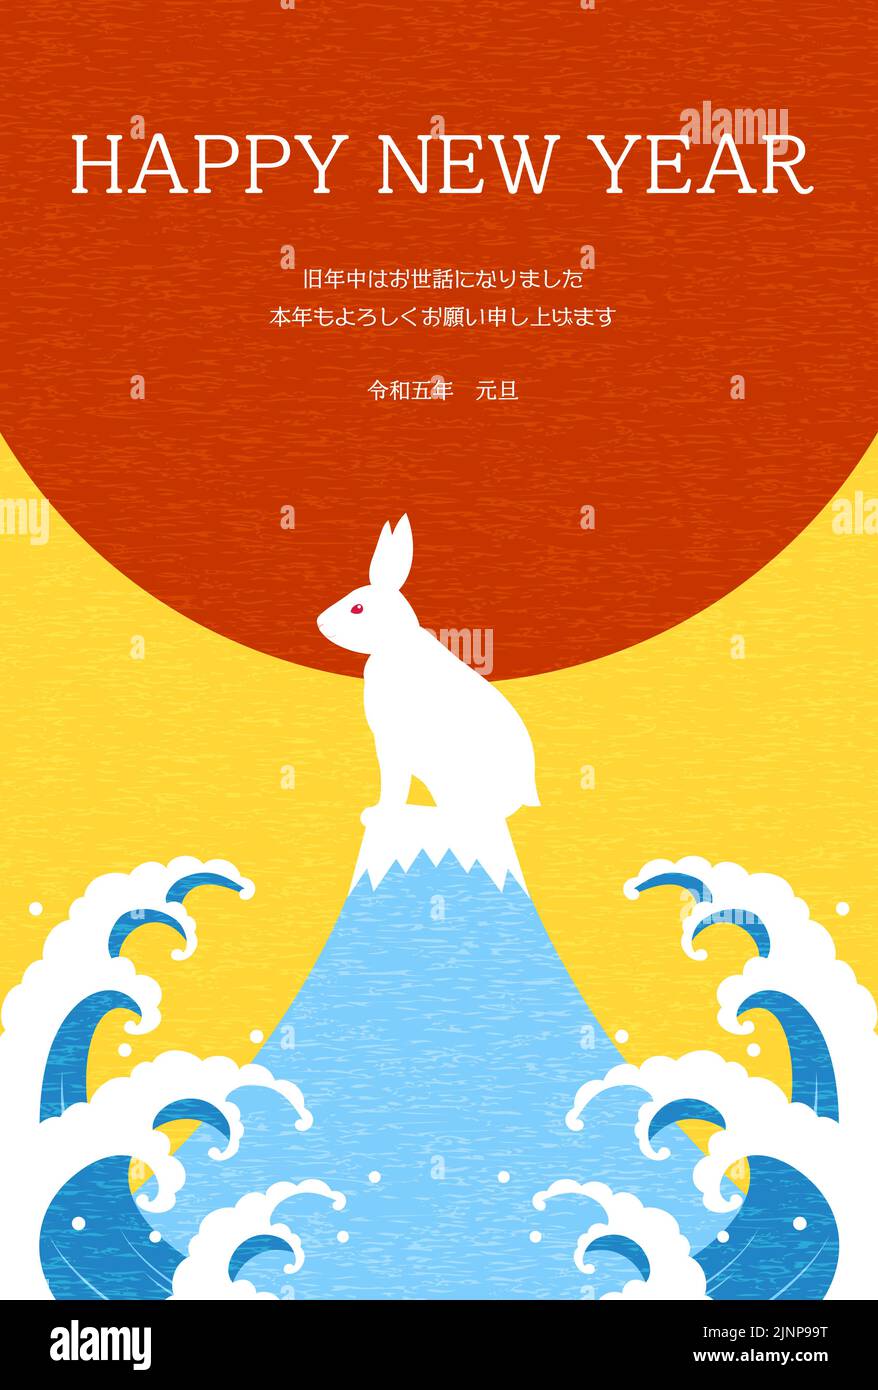 What to expect in the Year of the Rabbit - The Japan Times